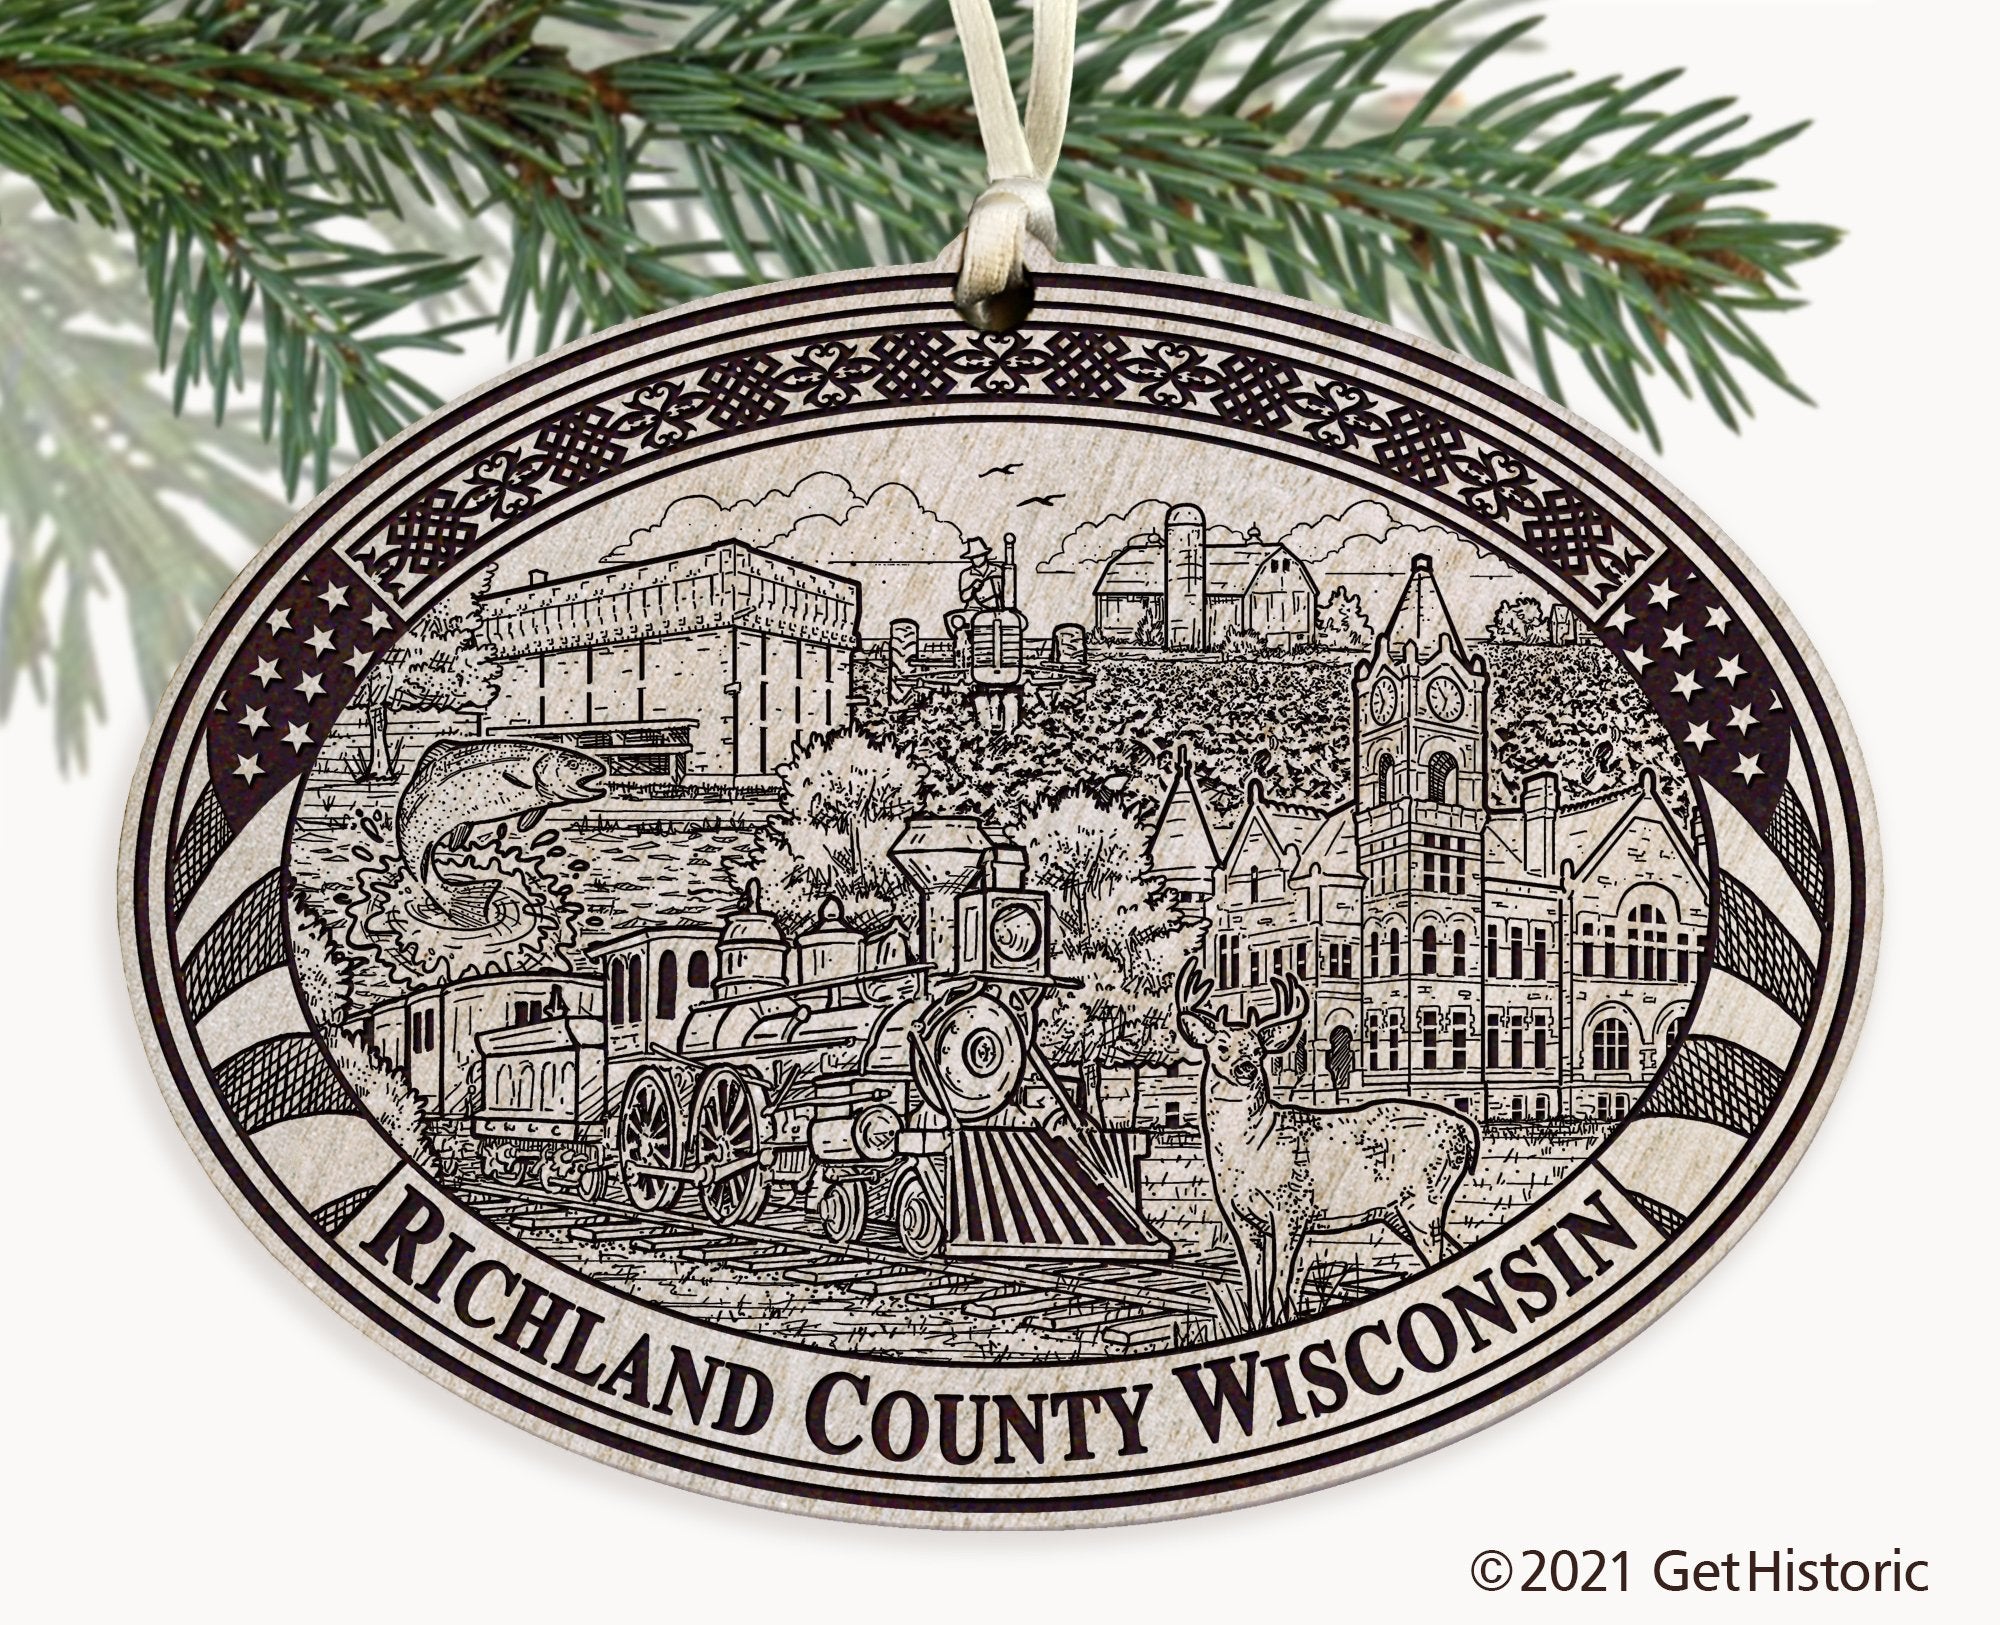 Richland County Wisconsin Engraved Ornament